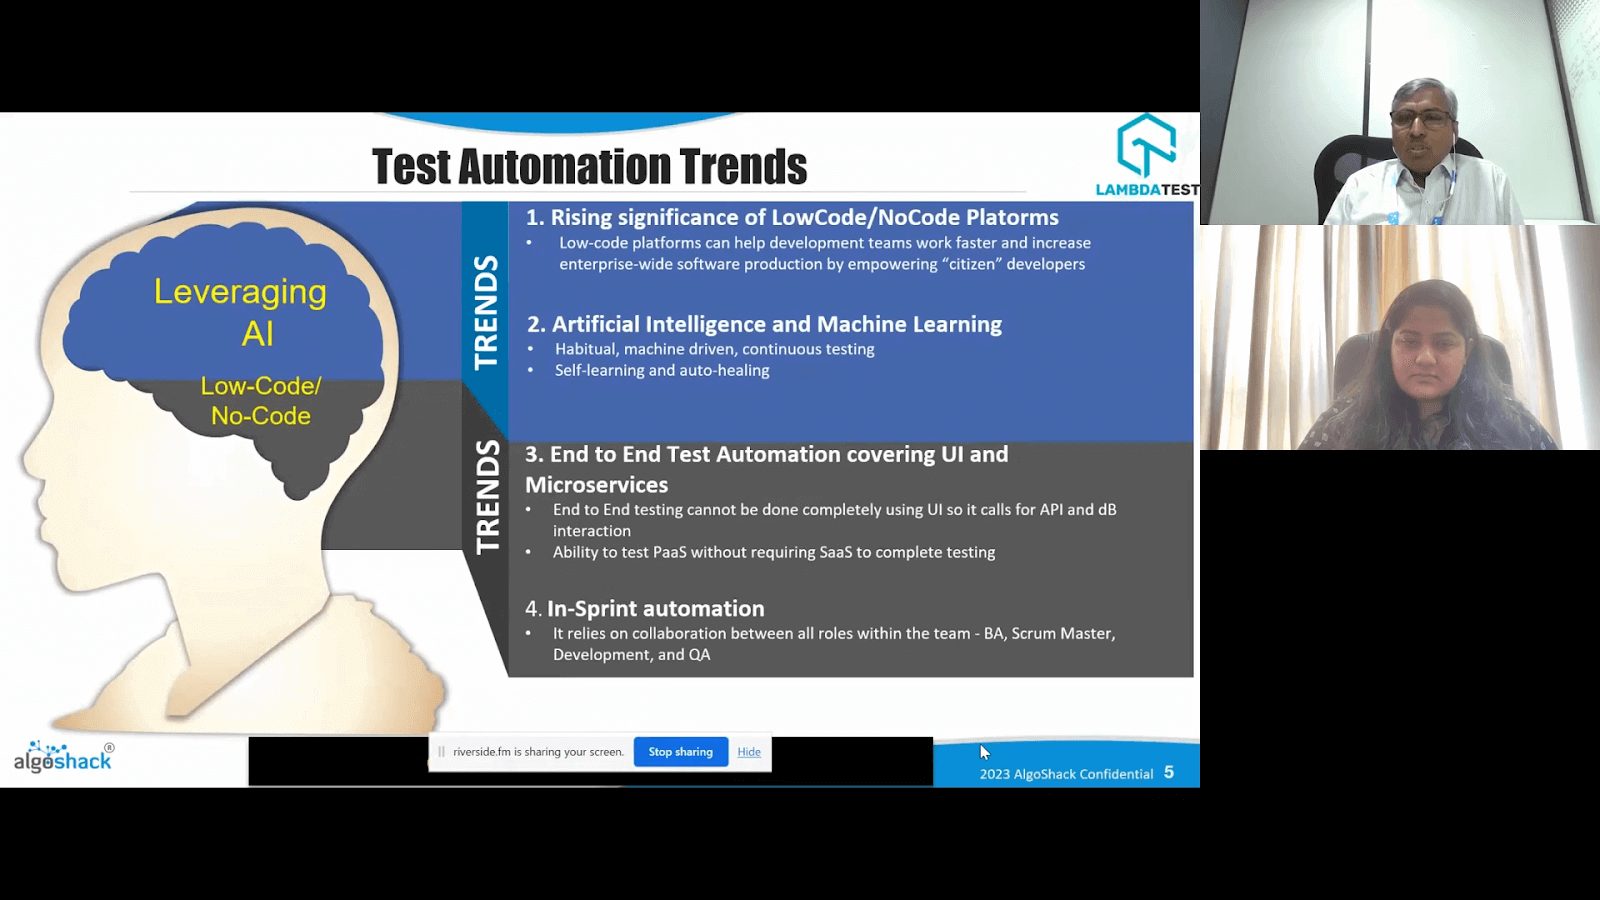 Test Automation Trends